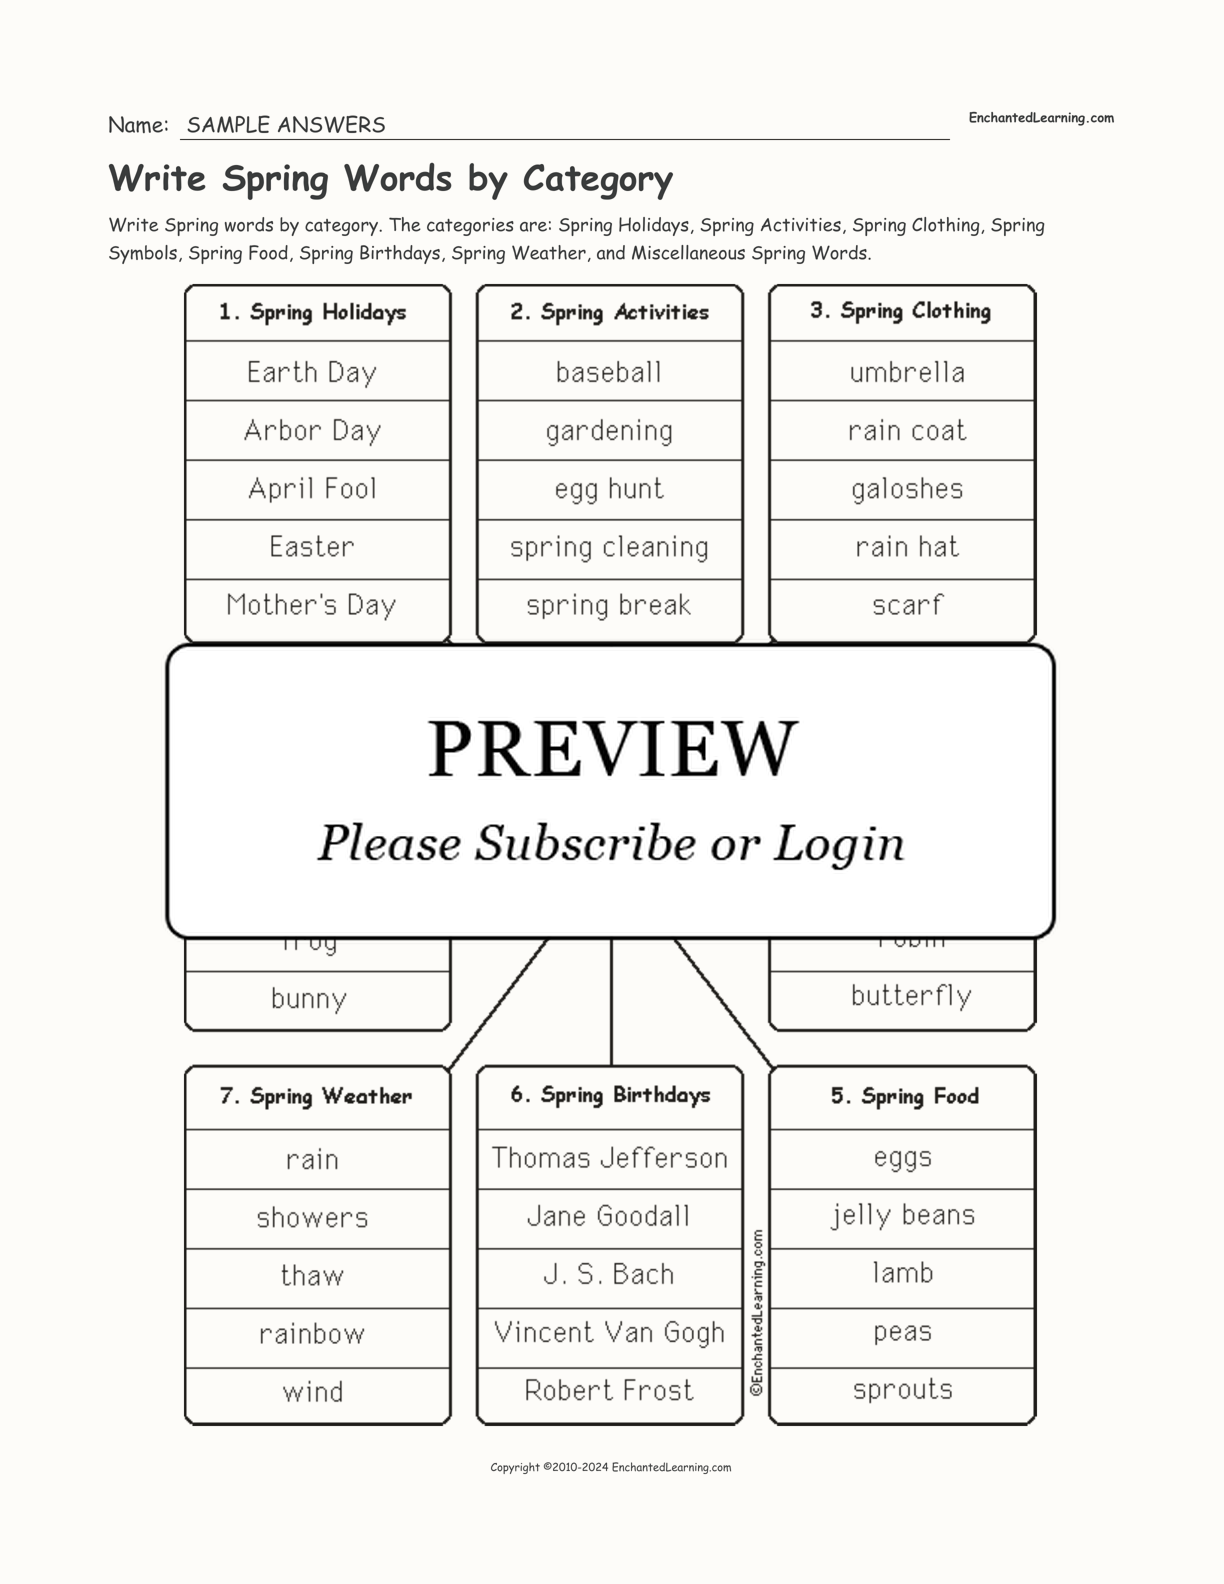 Write Spring Words by Category interactive worksheet page 2